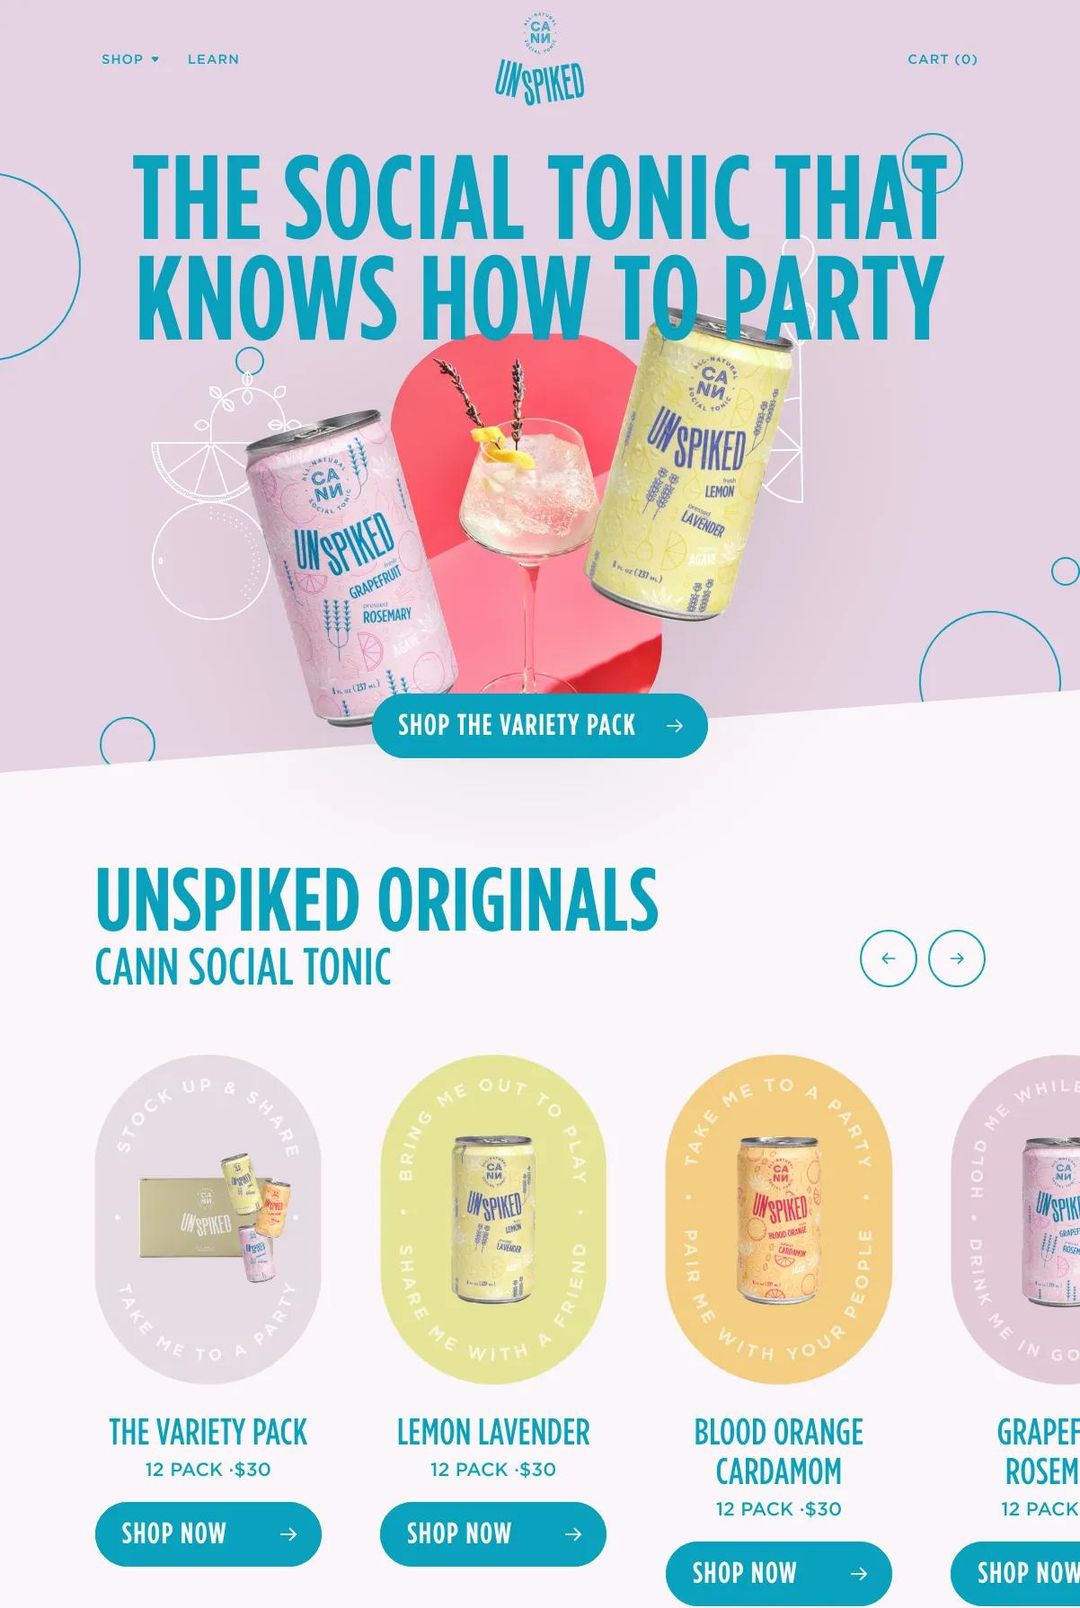 Screenshot 1 of Unspiked (Example Shopify Food and Beverage Website)